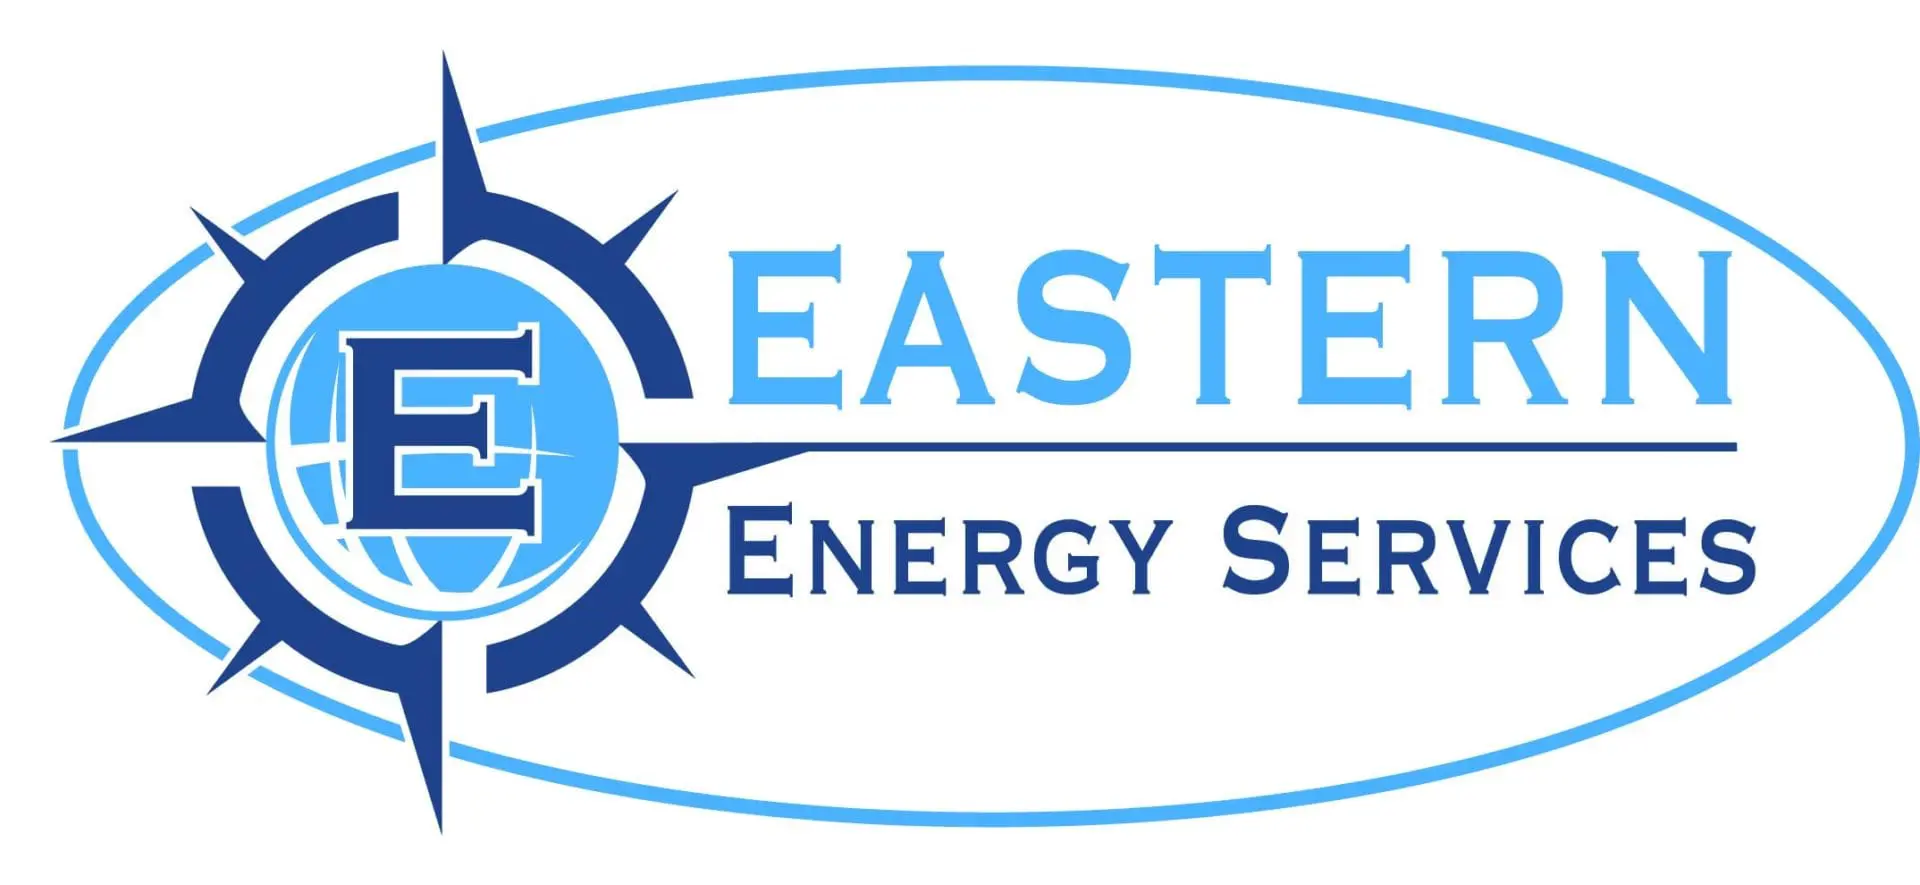 https://tgrrecovery.com/wp-content/uploads/2022/12/Easter-Energy-Services-logo-for-link-scaled.jpg